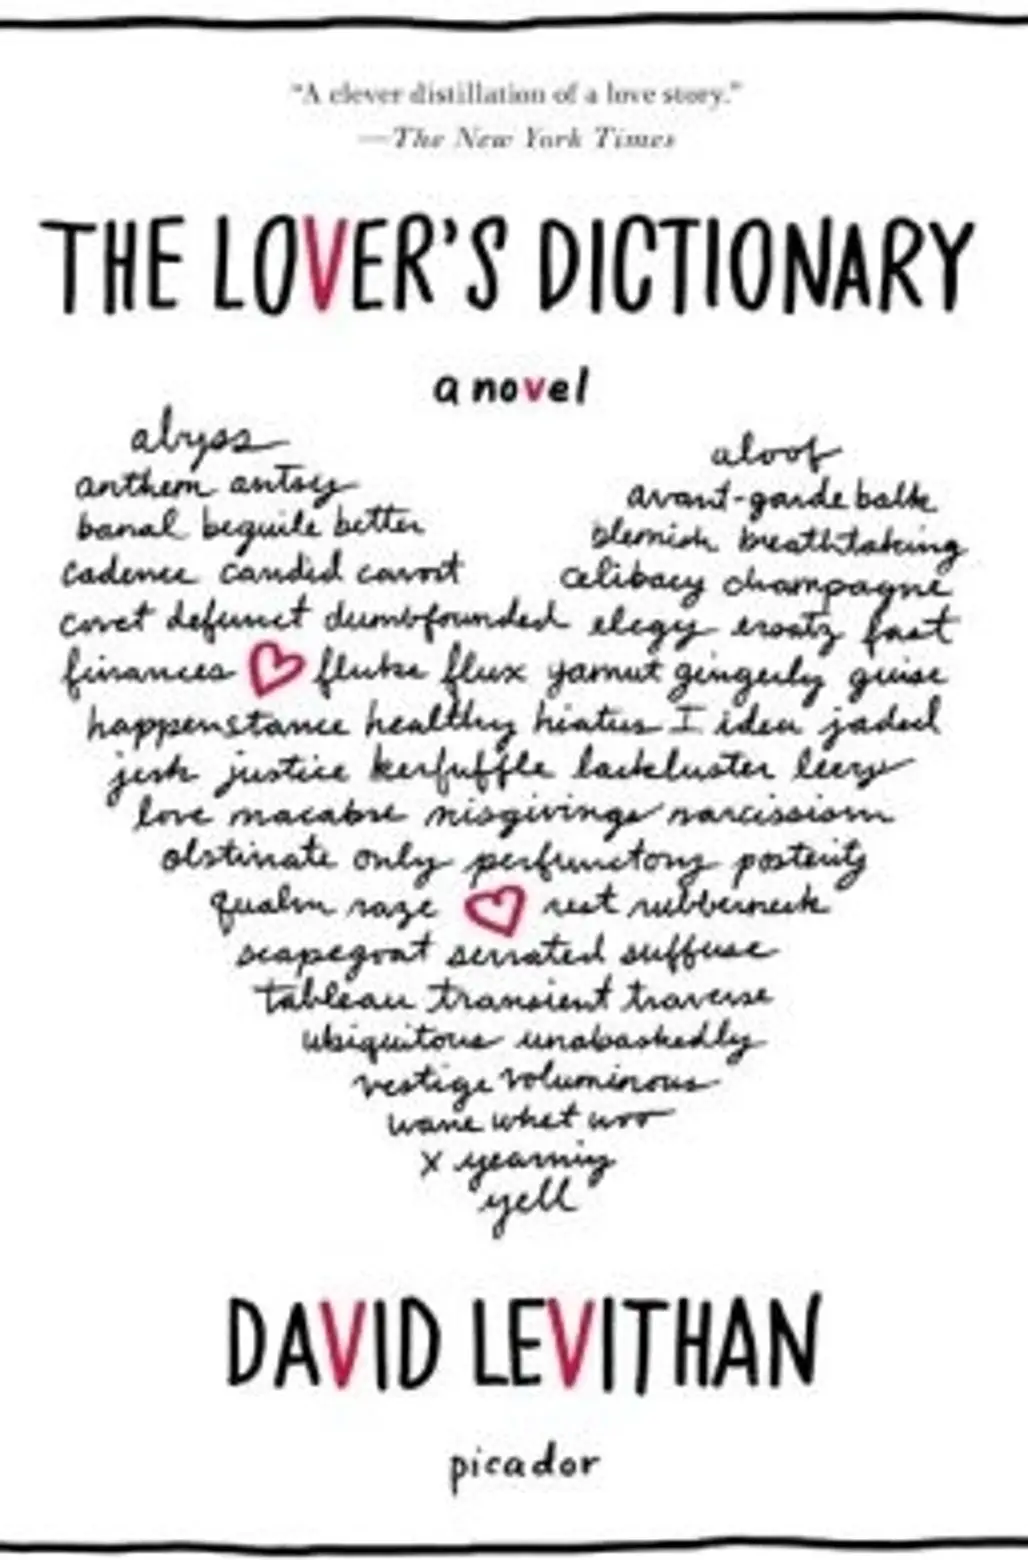 The Lover’s Dictionary by David Levithan